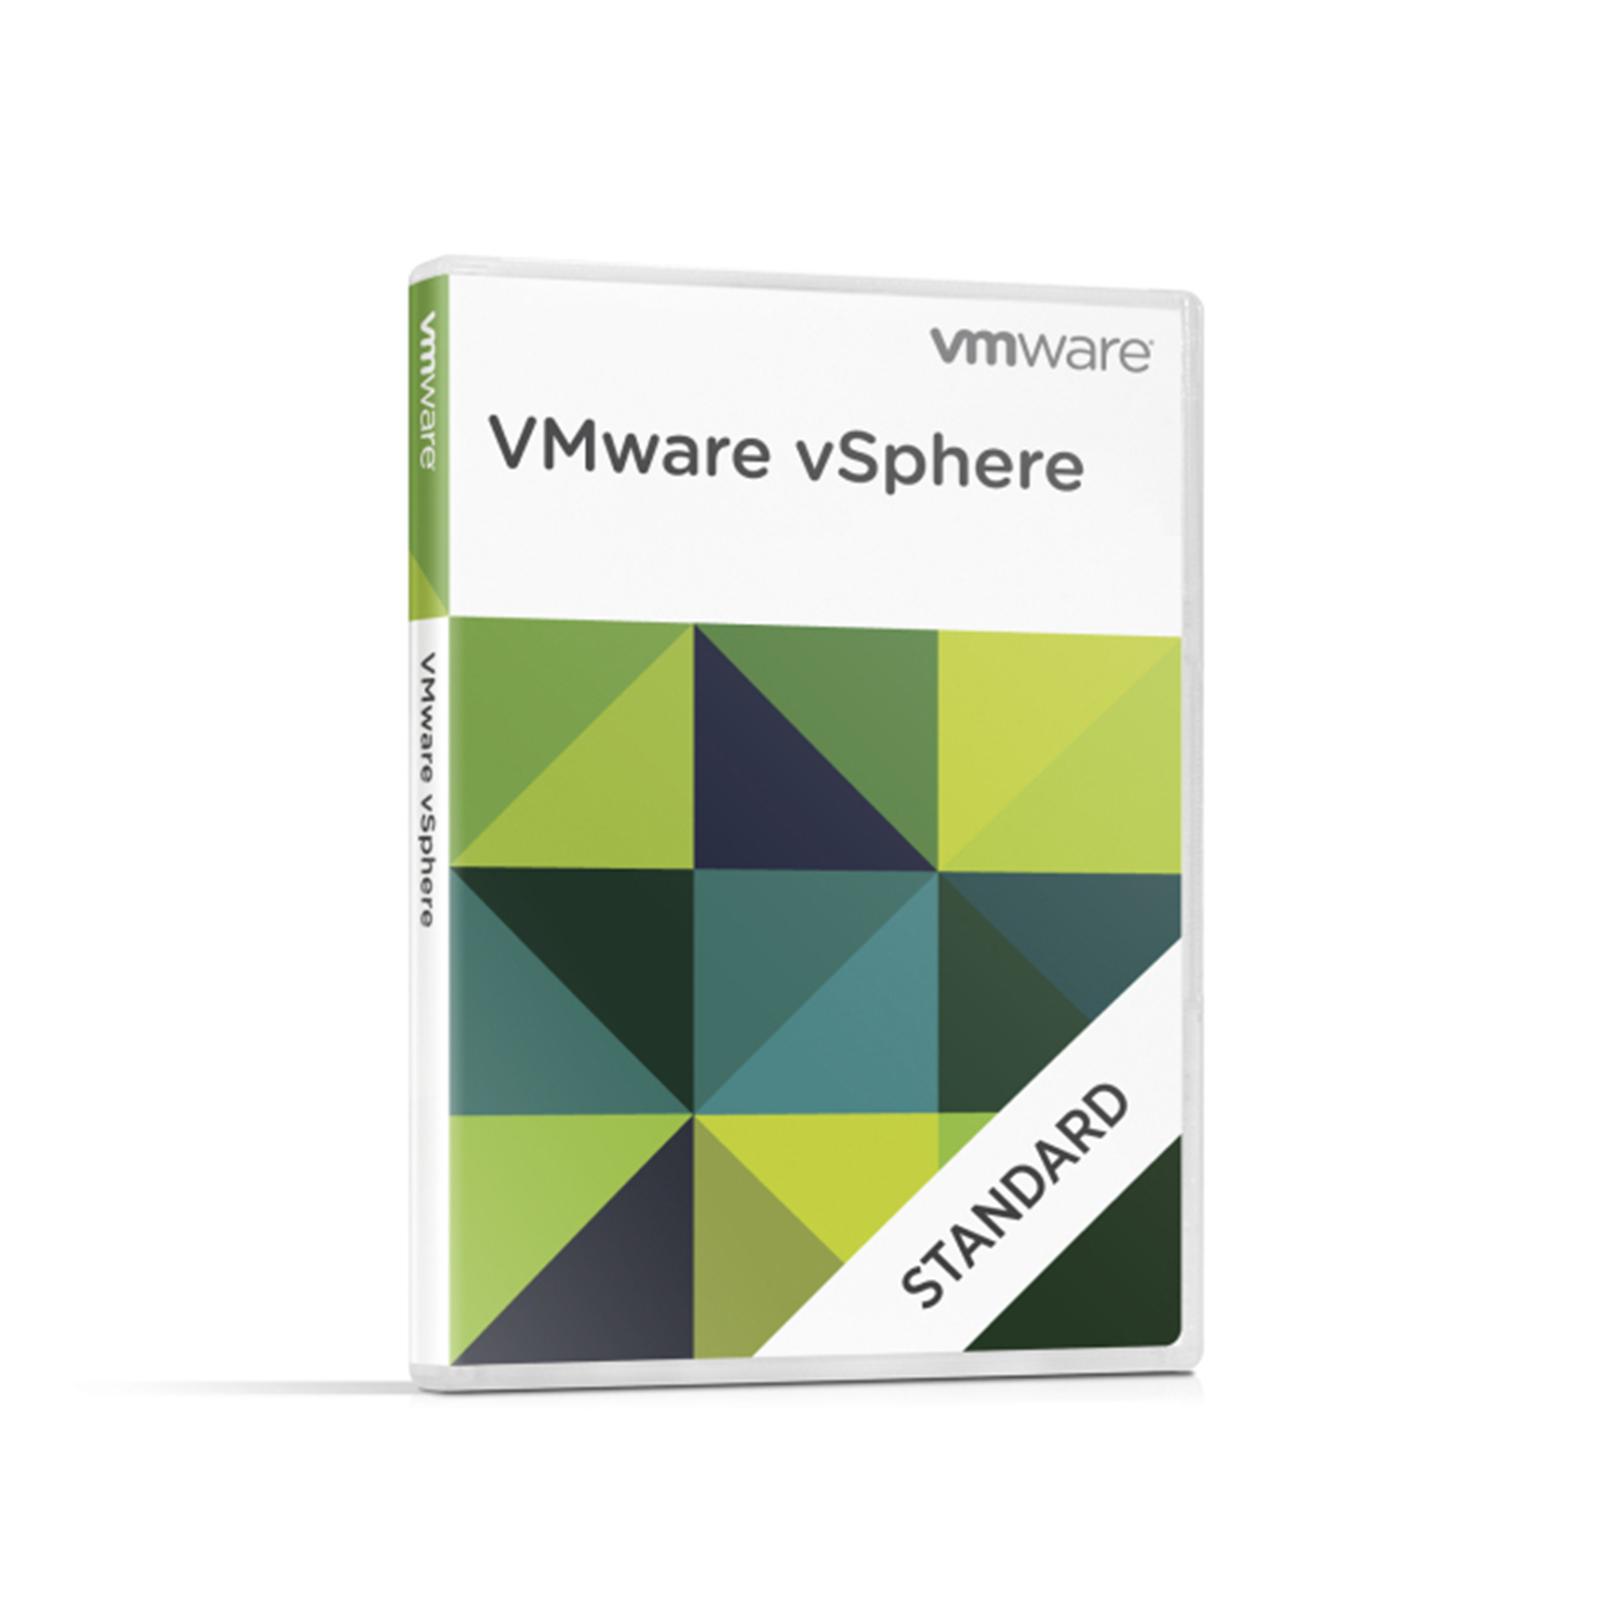 VMWARE STD AND SUPPORT